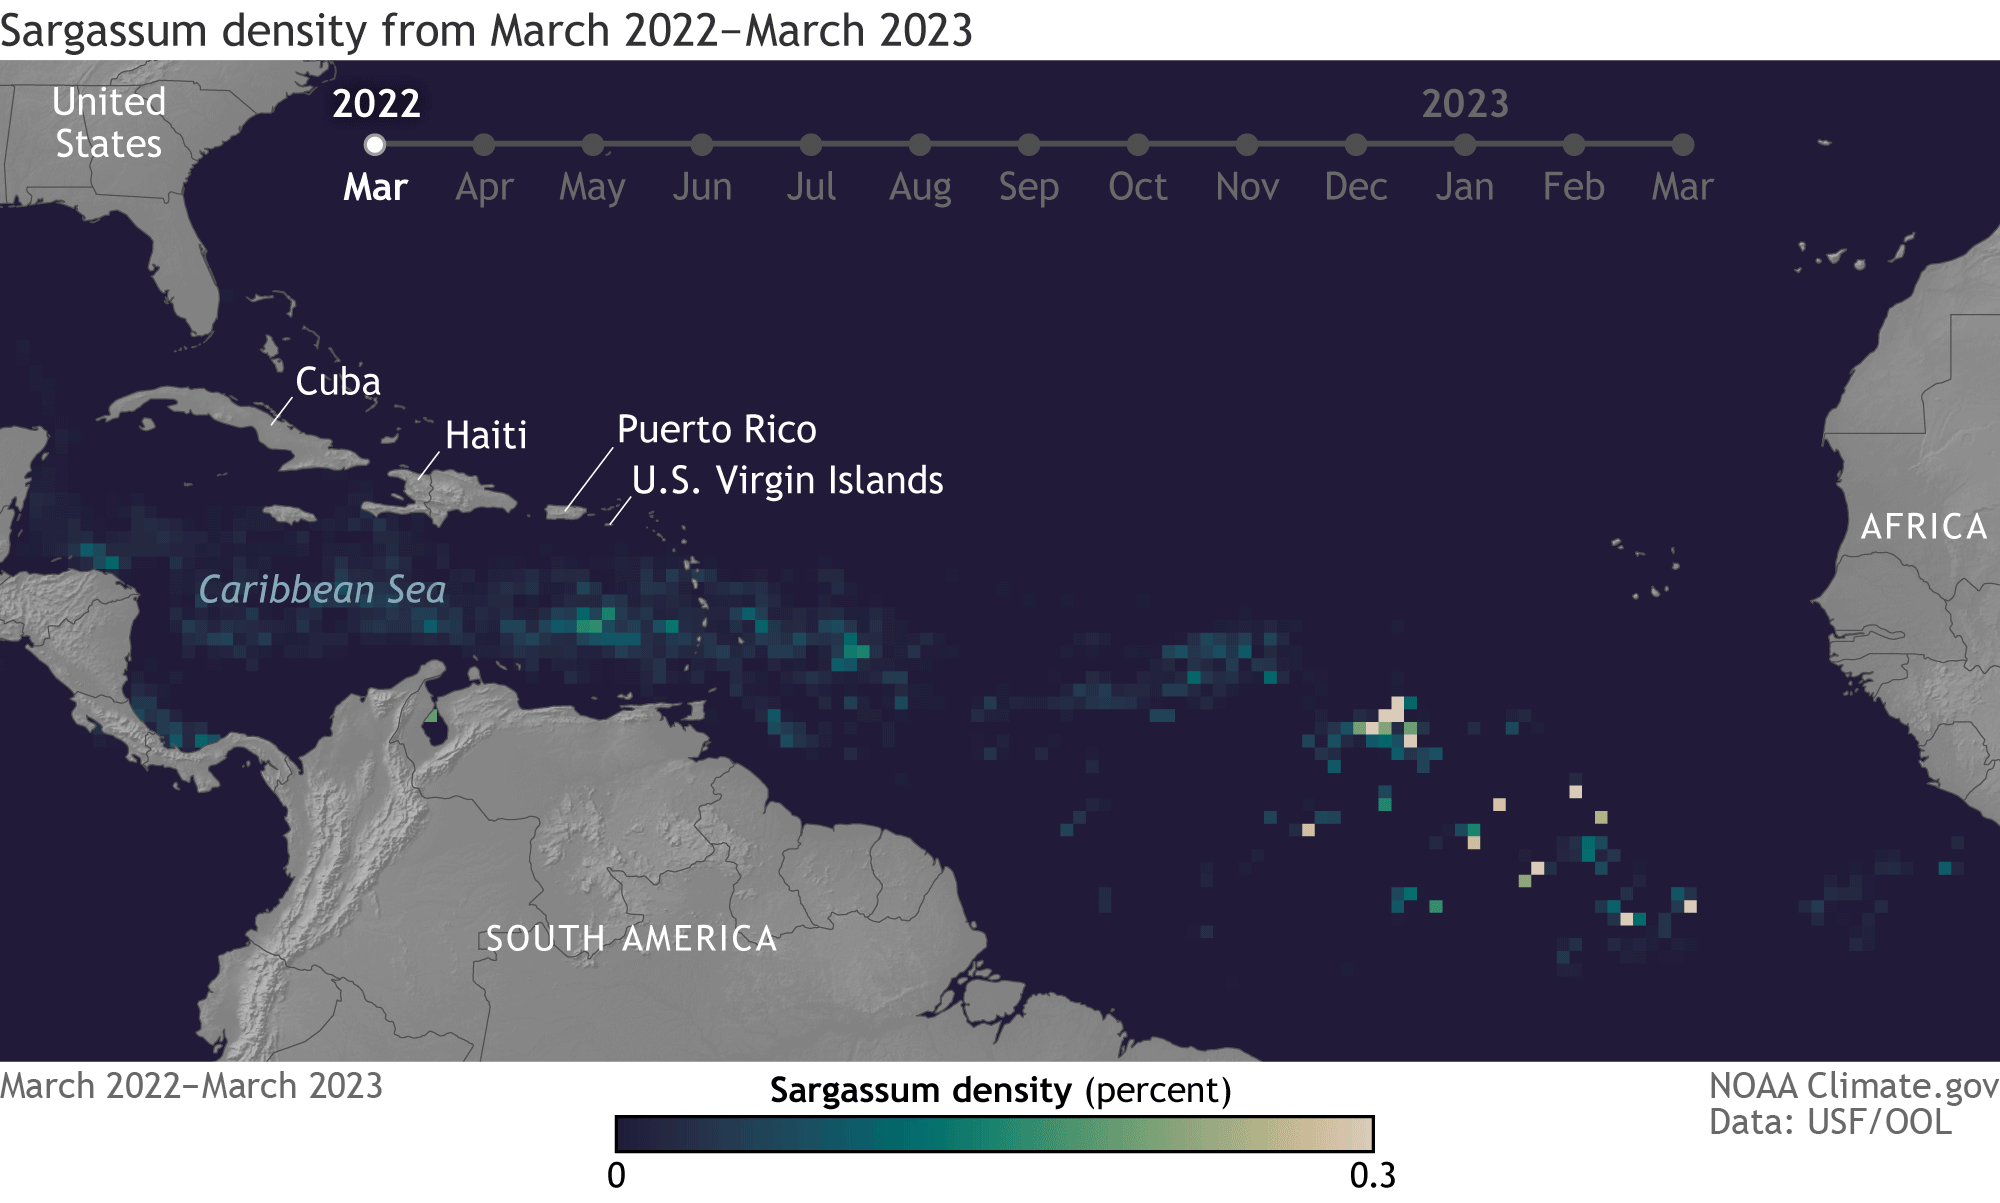 This data visualization animation shows the change in the density of Sargassum from March 2022 to March 2023. The animation highlights the regions of the Caribbean Sea, the eastern coast of Central America, and the northern coast of South America. There are markers for locations such as the United States, Cuba, Haiti, Puerto Rico, and the U.S. Virgin Islands. The months of the year 2022 through early 2023 are indicated across the top. The density of Sargassum is indicated by color-coded squares, with a scal